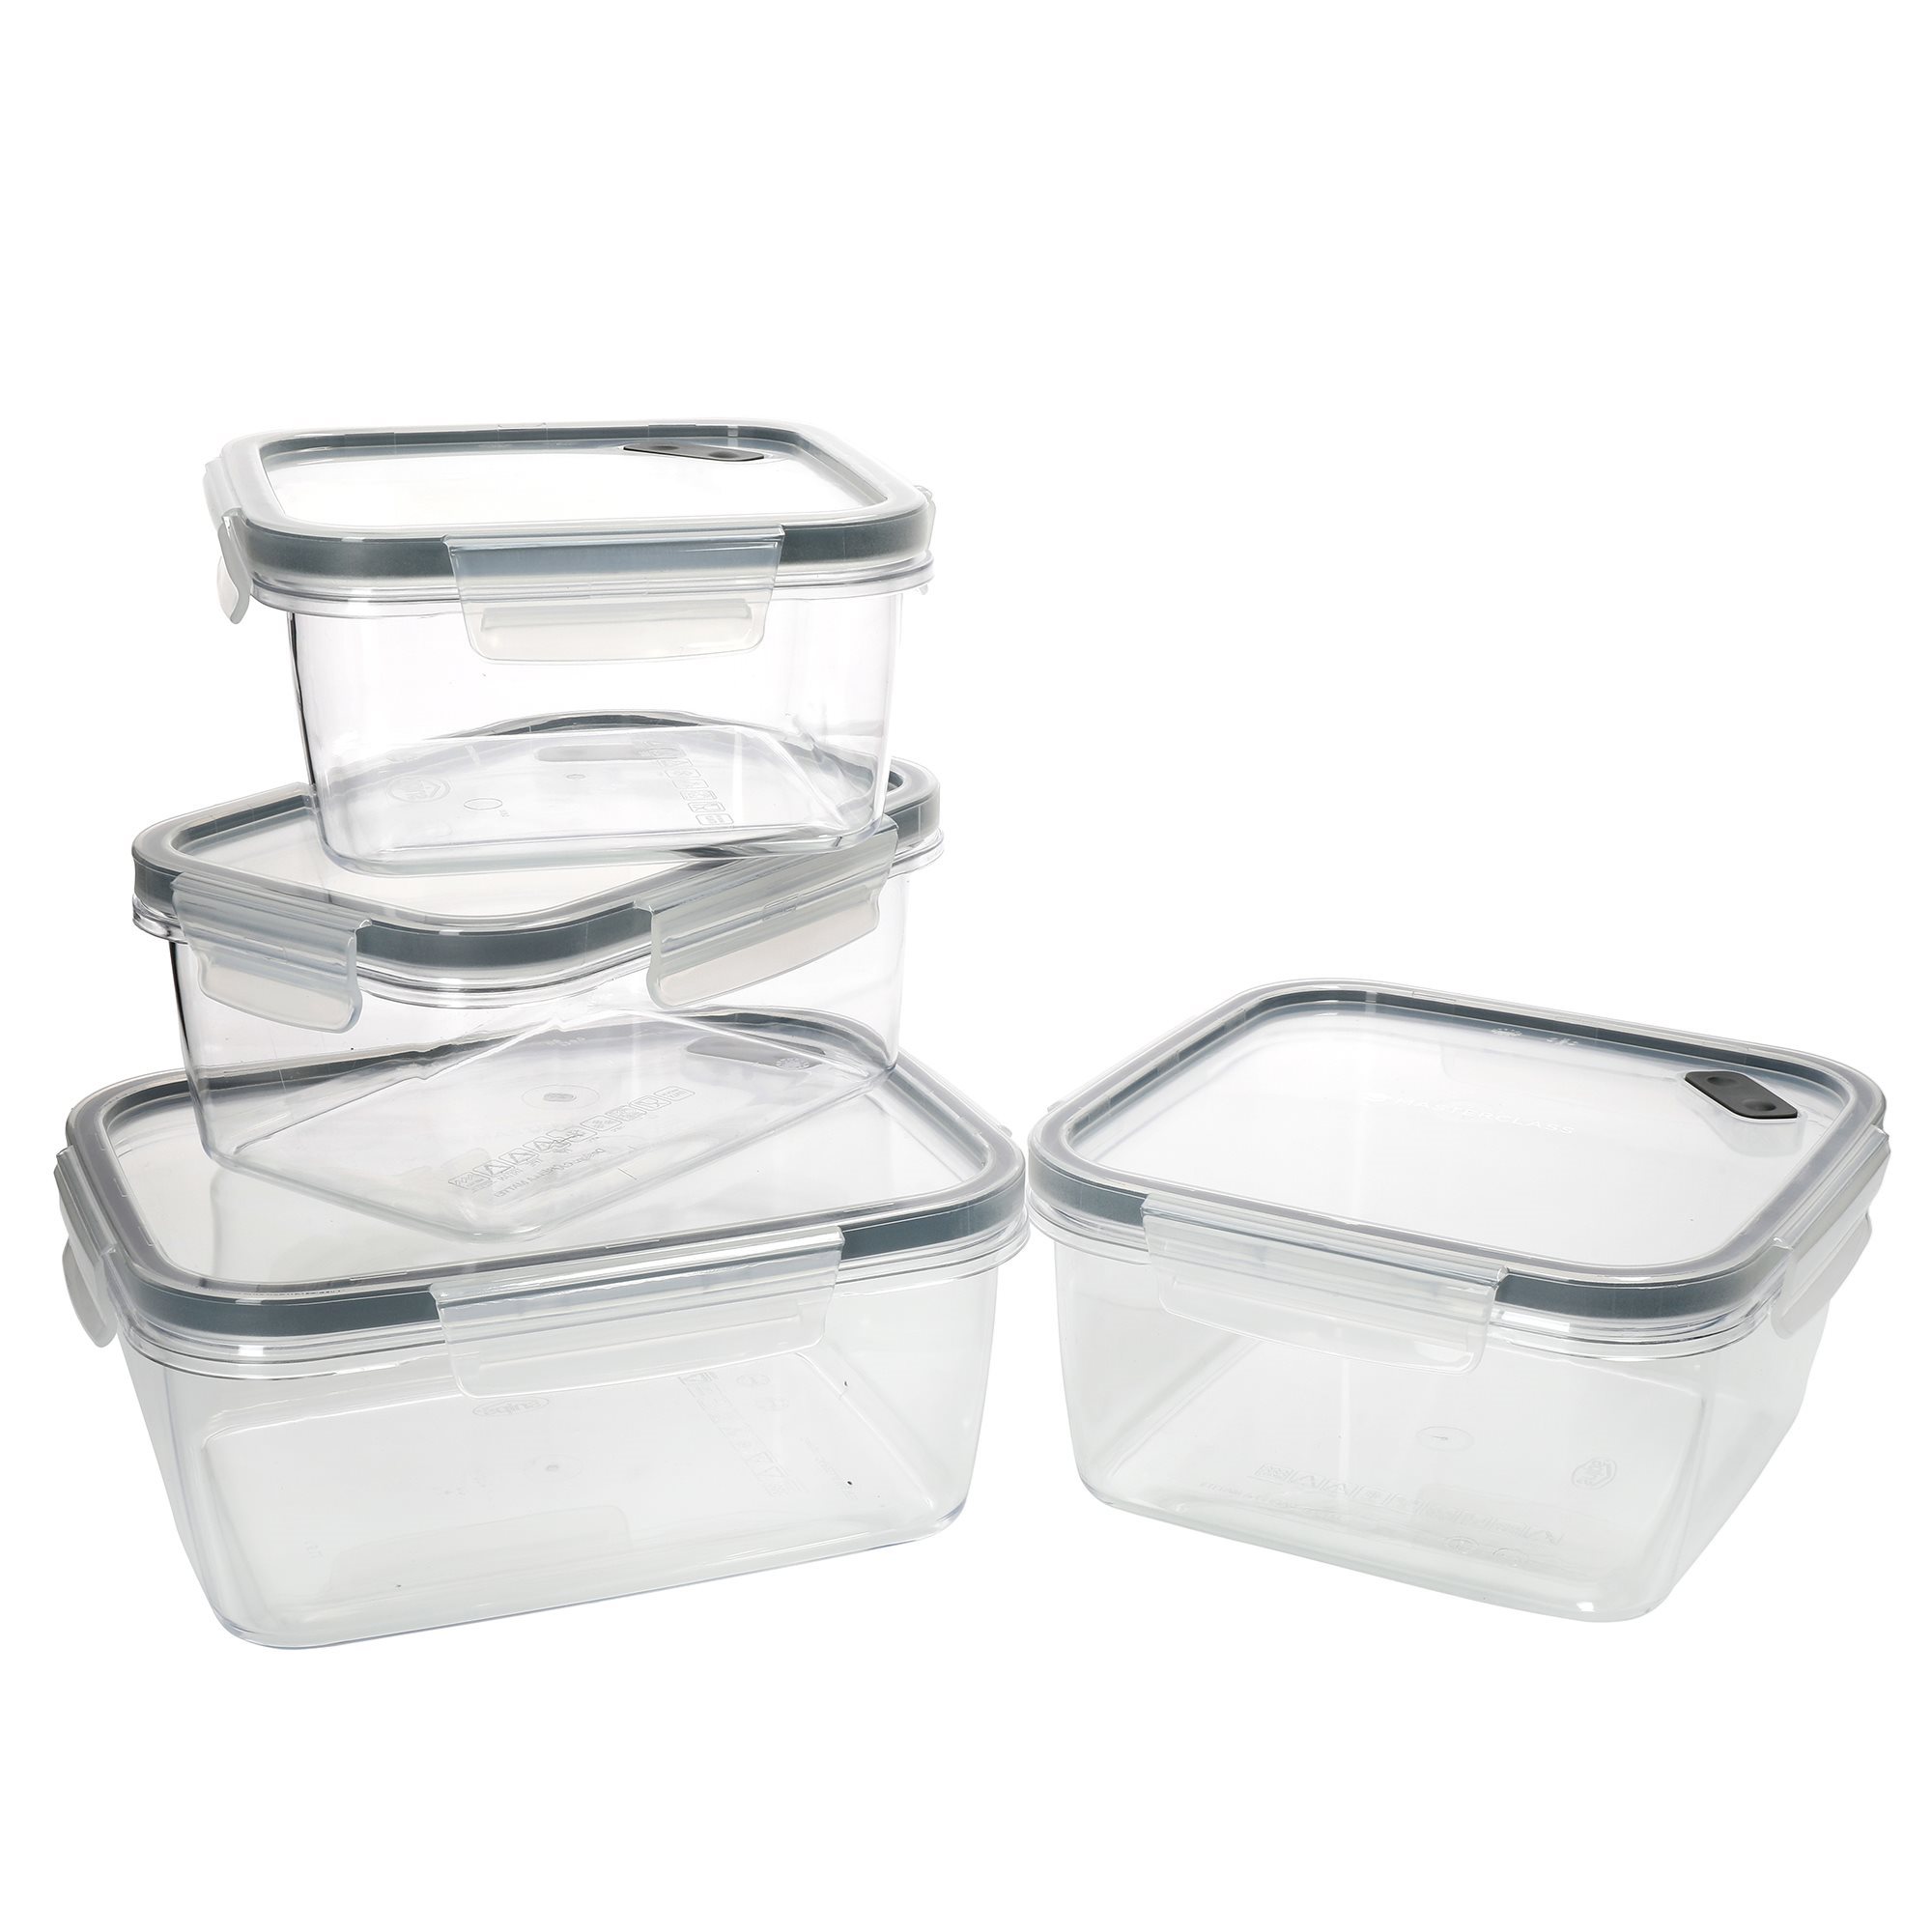 Set of 4 Eco Smart Snap food storage containers, MasterClass – Kitchen  Craft